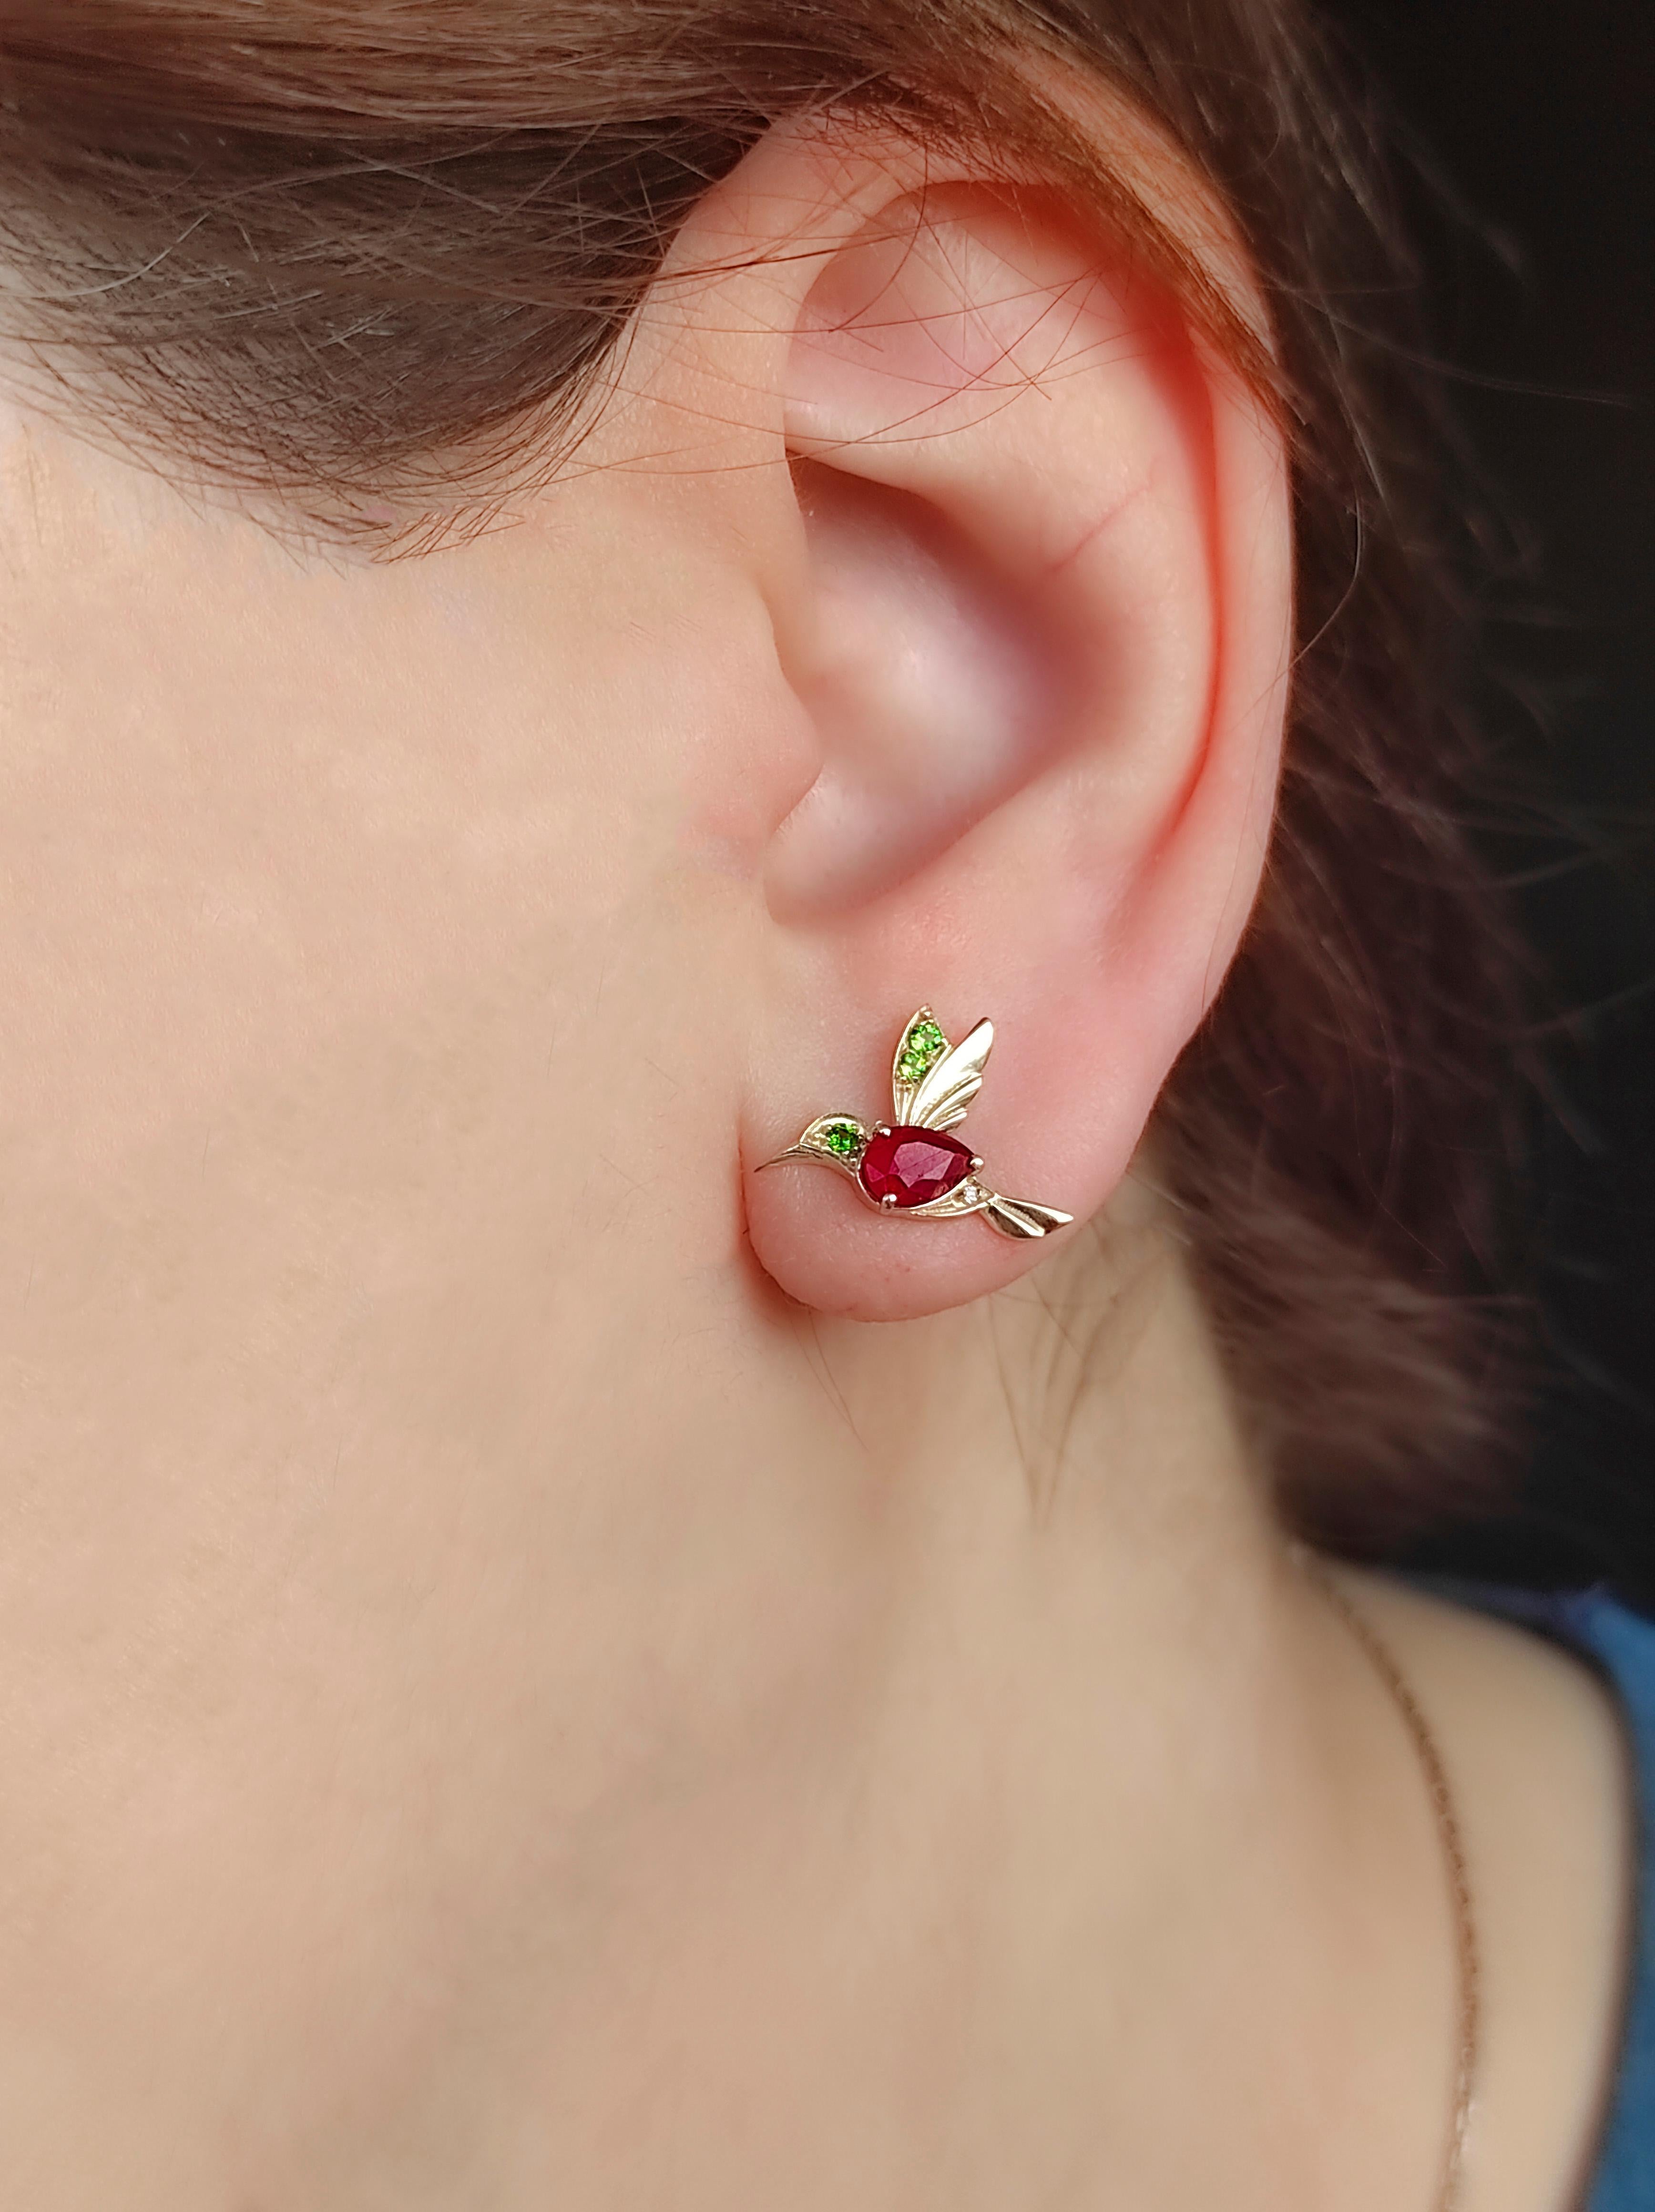 14k Gold Hummingbird Earings Studs with Rubies, Bird Stud Earrings with Gems ! For Sale 3